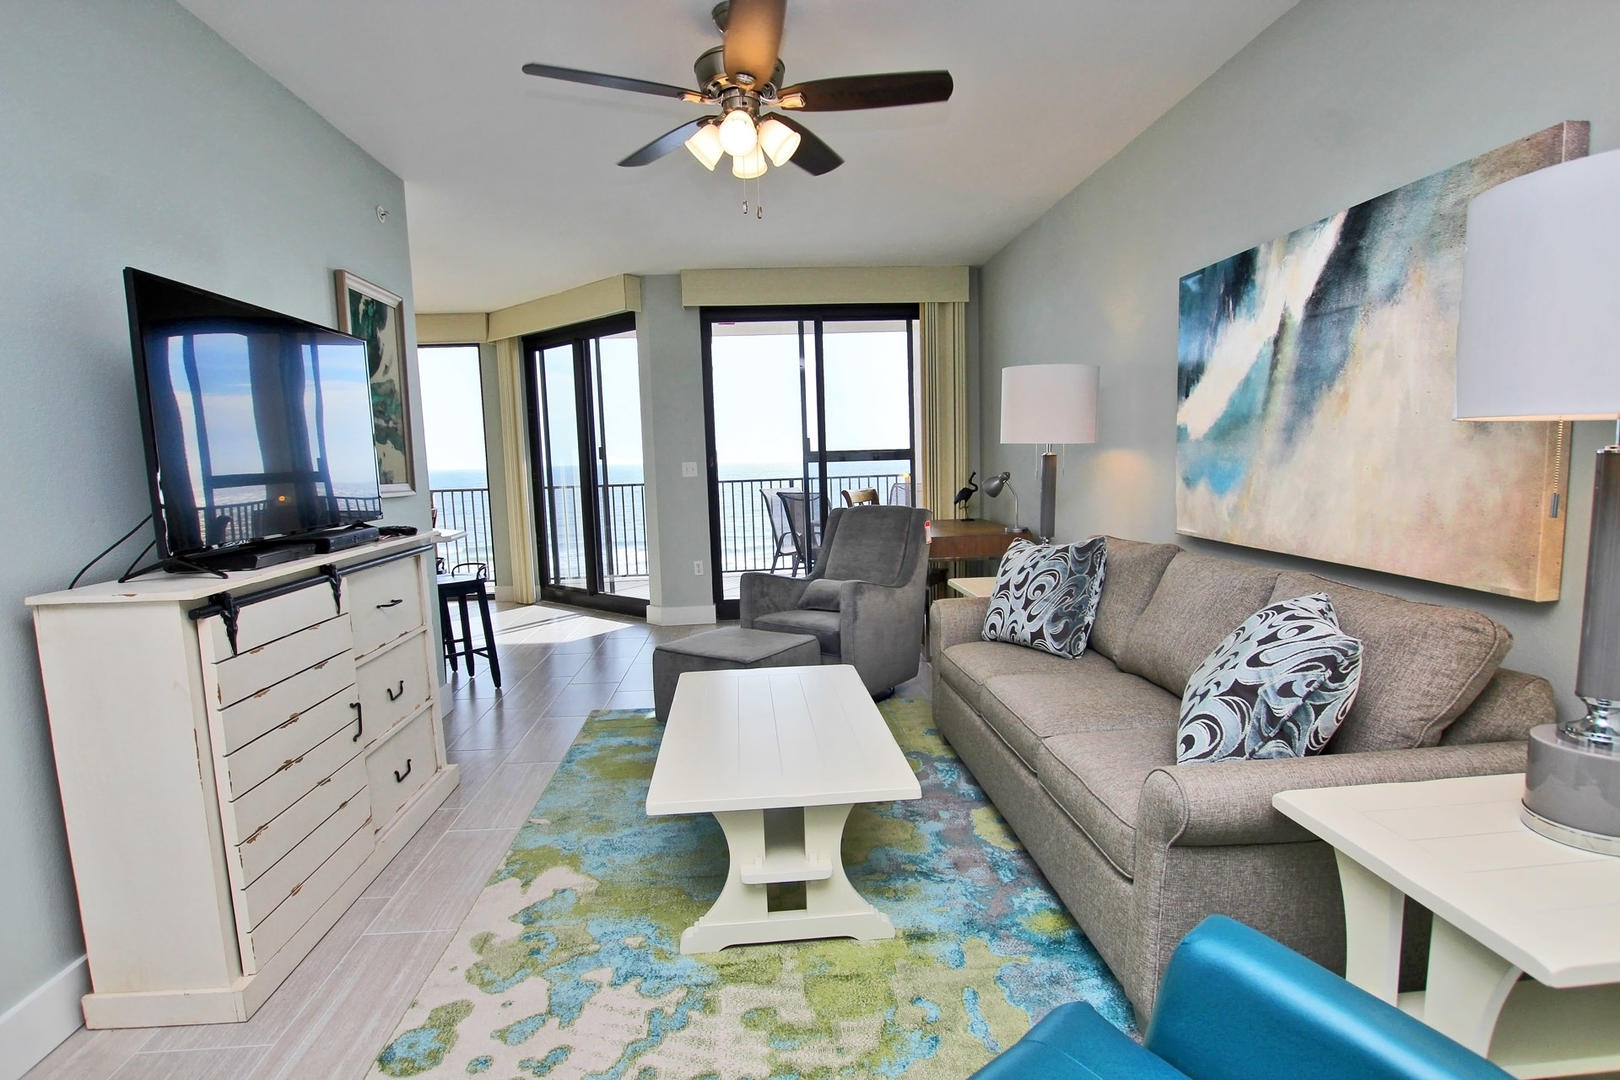 8th Floor Gulf Front Condo with a Large Balcony